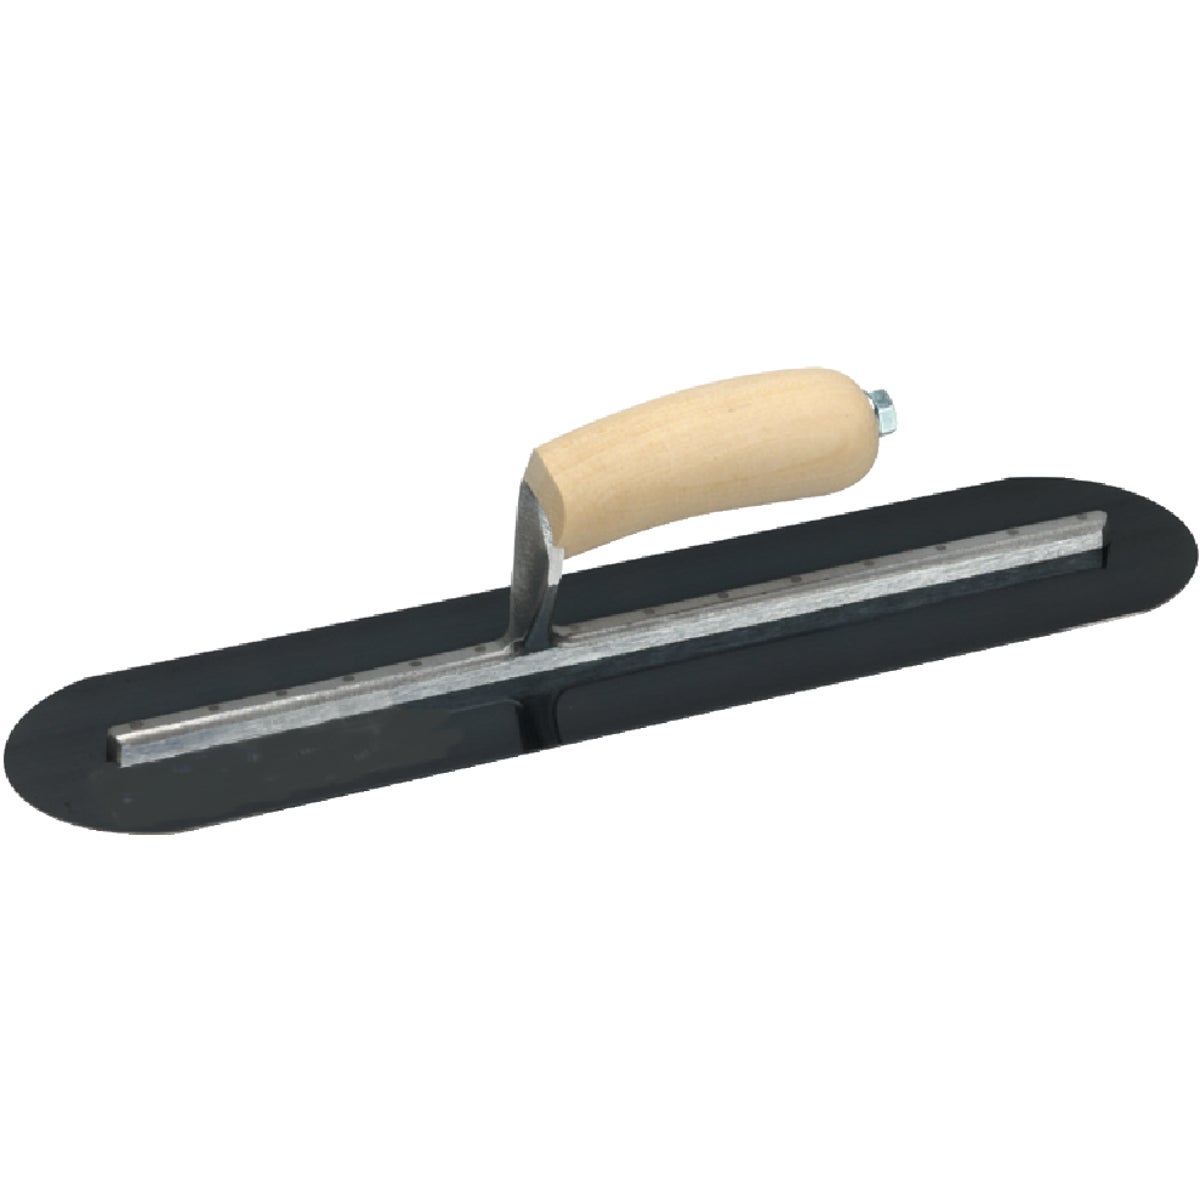 Marshalltown 4 In. x 18 In. Blue Steel Fully Rounded Finishing Trowel with Curved Wood Handle